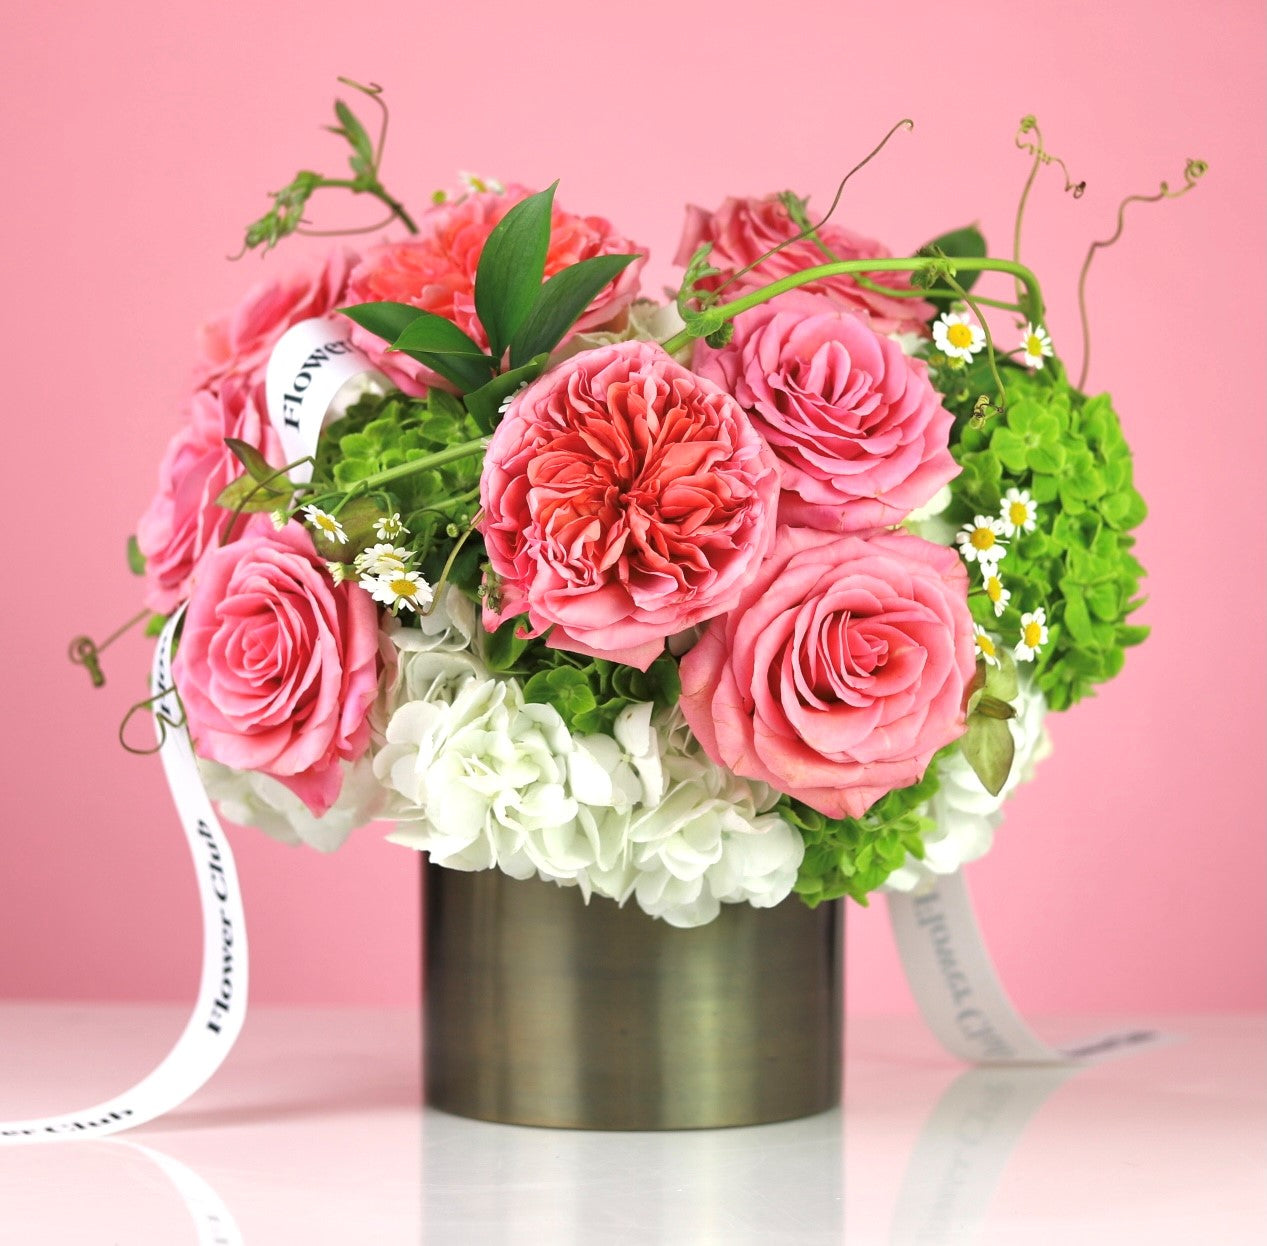 Roses & Hydrangea mix  $150 (Free next day nationwide delivery)